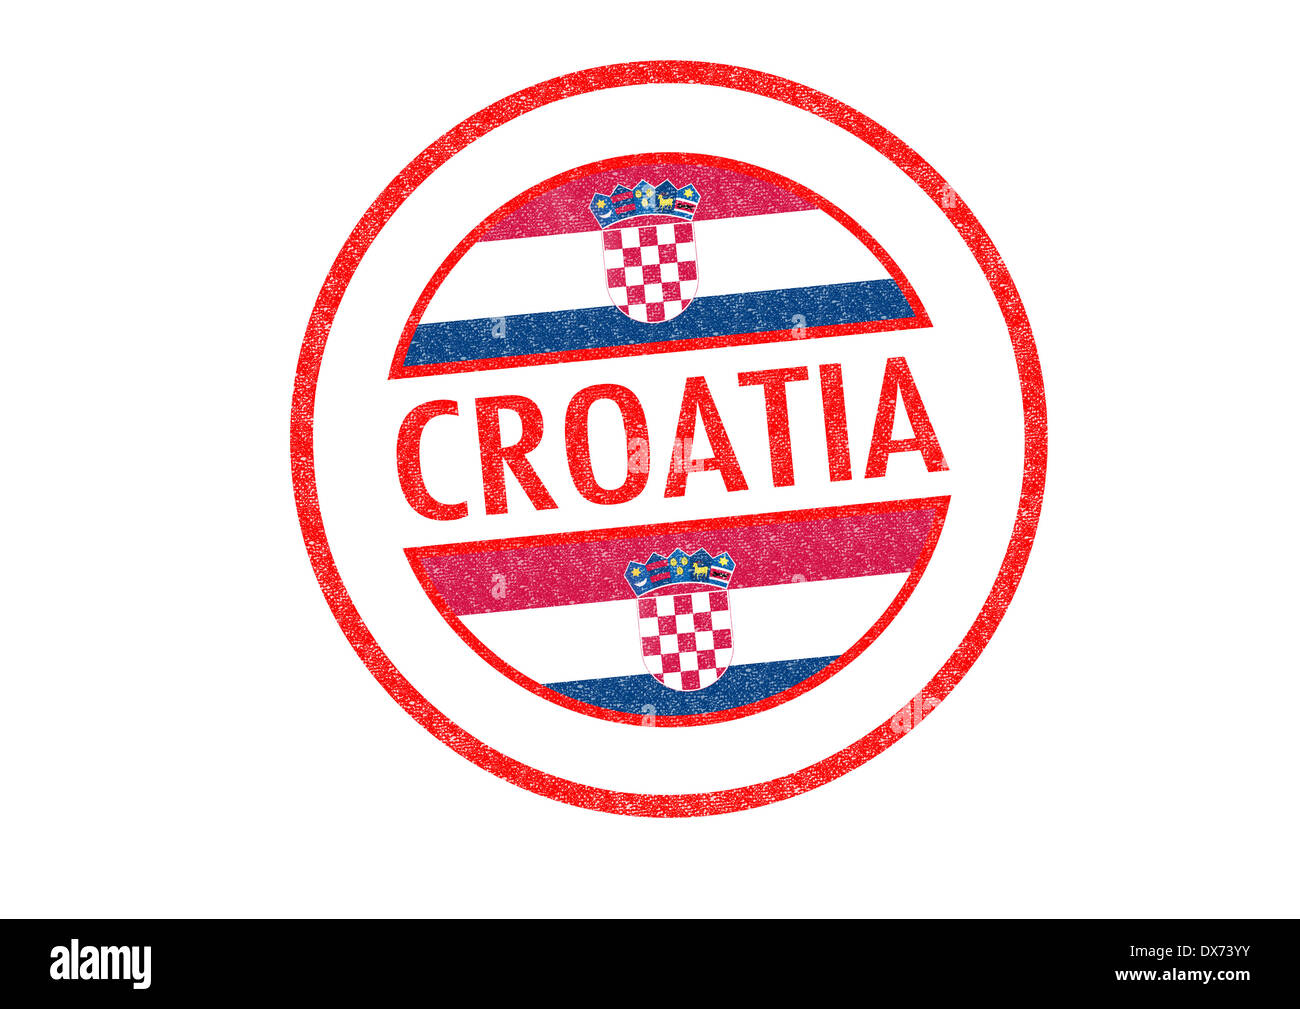 Passport-style CROATIA rubber stamp over a white background. Stock Photo